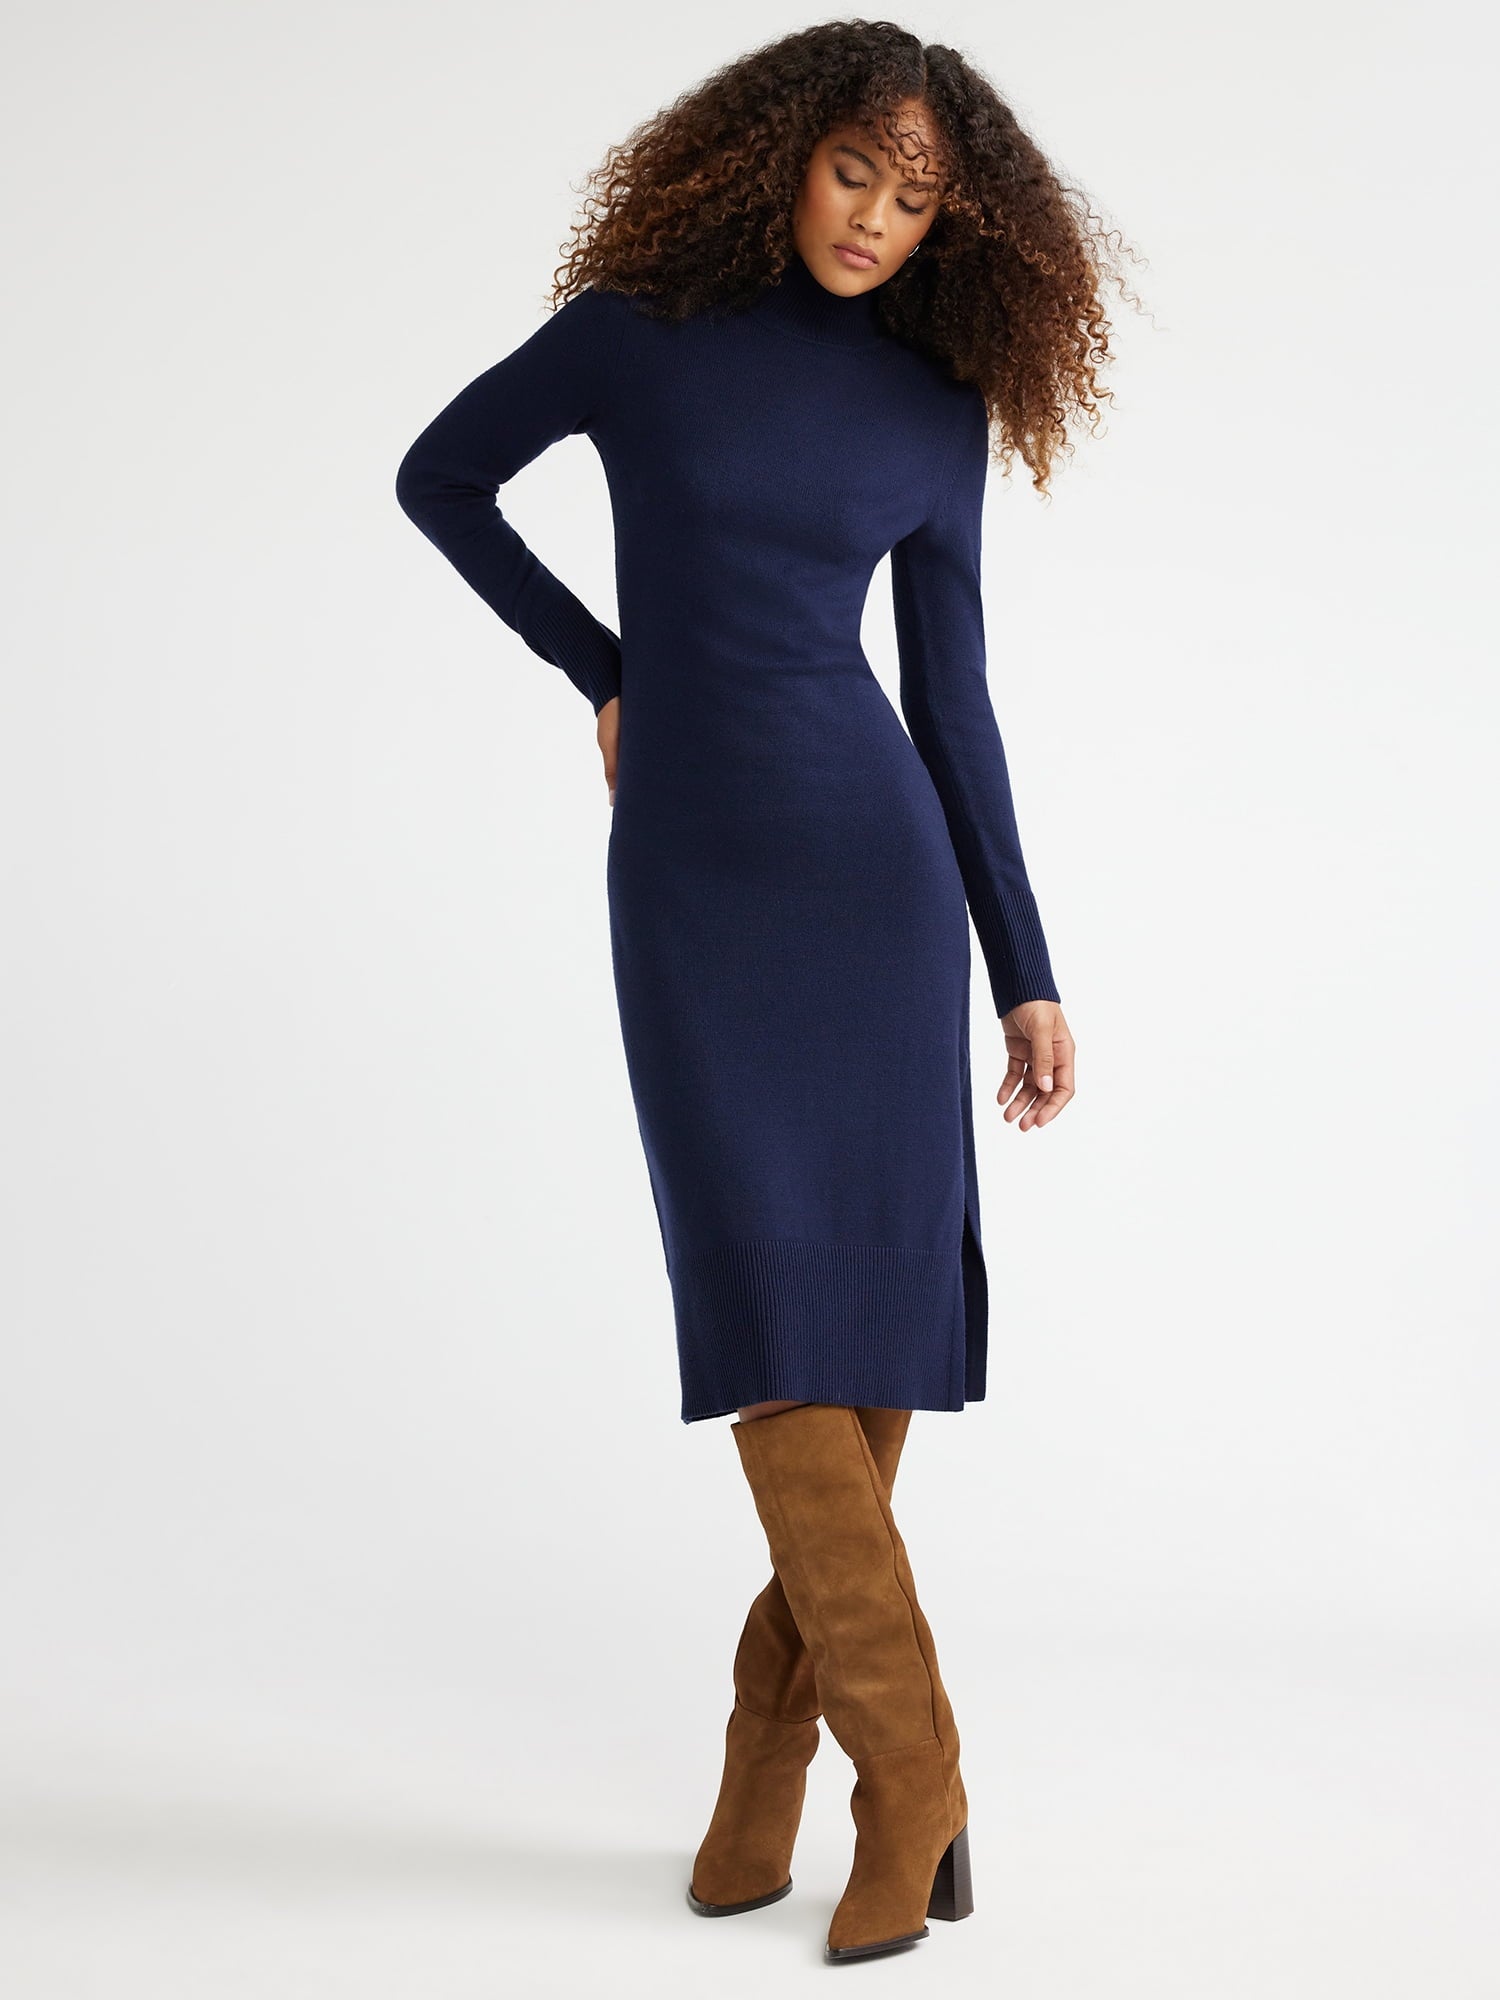 Free Assembly Women’s Turtleneck Sweater Midi Dress with Long Sleeves, Sizes XS-XXXL - image 4 of 10